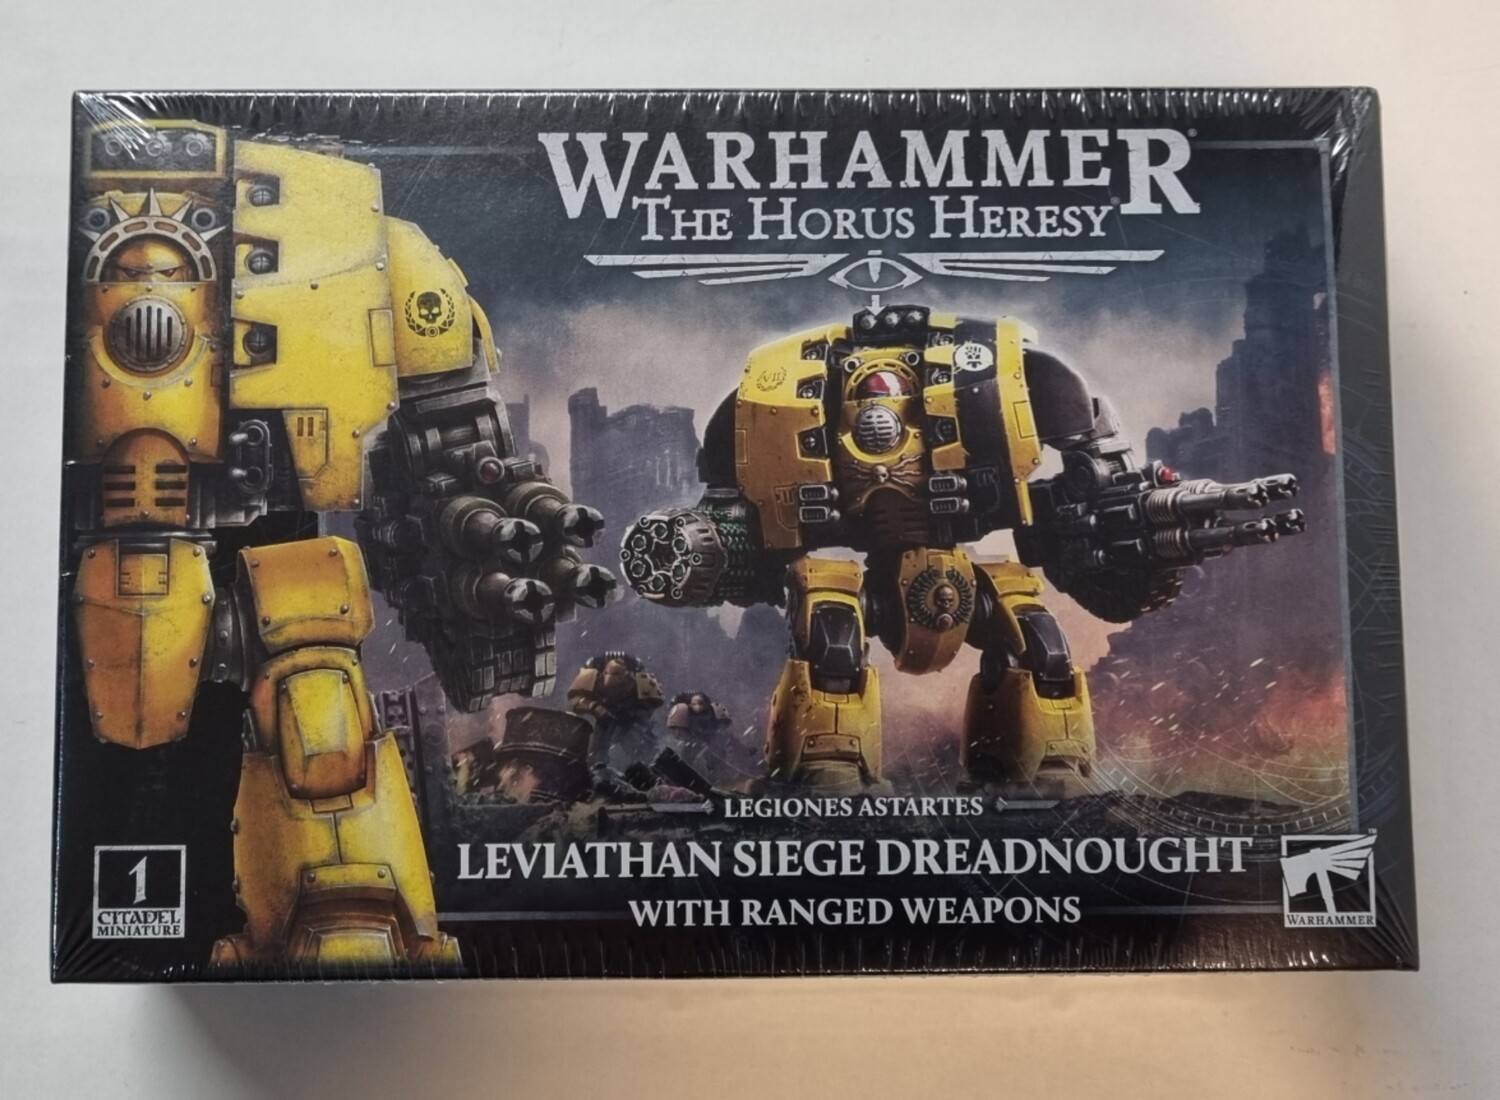 Warhammer, 40k, 31-28, The Horus Heresy: Leviathan Siege Dreadnought with Ranged Weapons